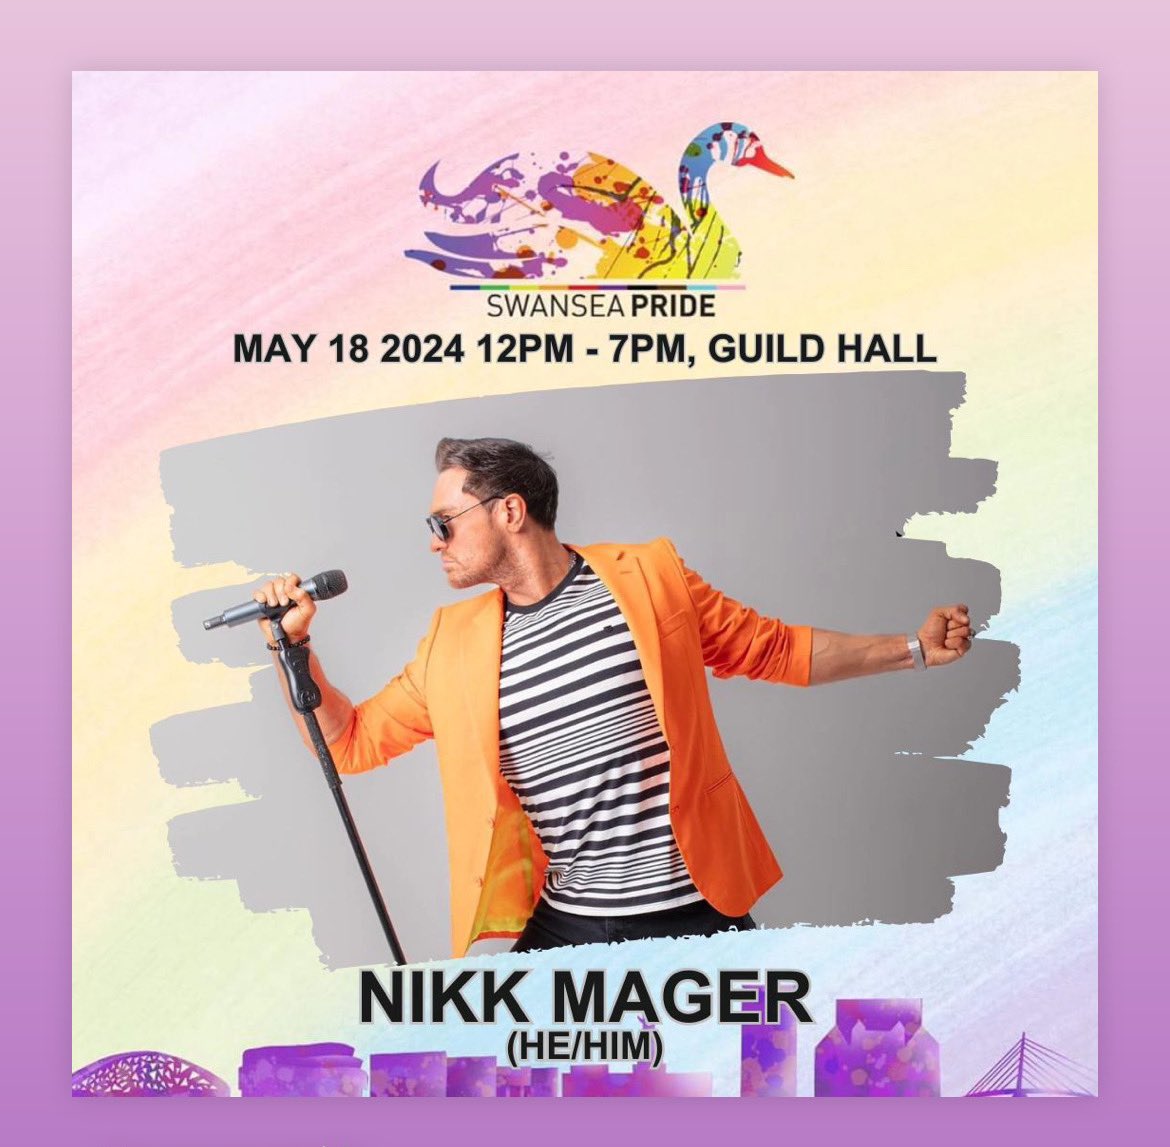 @swanseapride I am thrilled to be a headlining act for pride on the 18th May its gonna be epic. 

Hitting the stage at 6pm. 
You won’t wanna miss it. 
Plus I will be throwing in some @PhixxOfficial tracks for some nostalgia!

#swanseapride #headliner #pride #singer